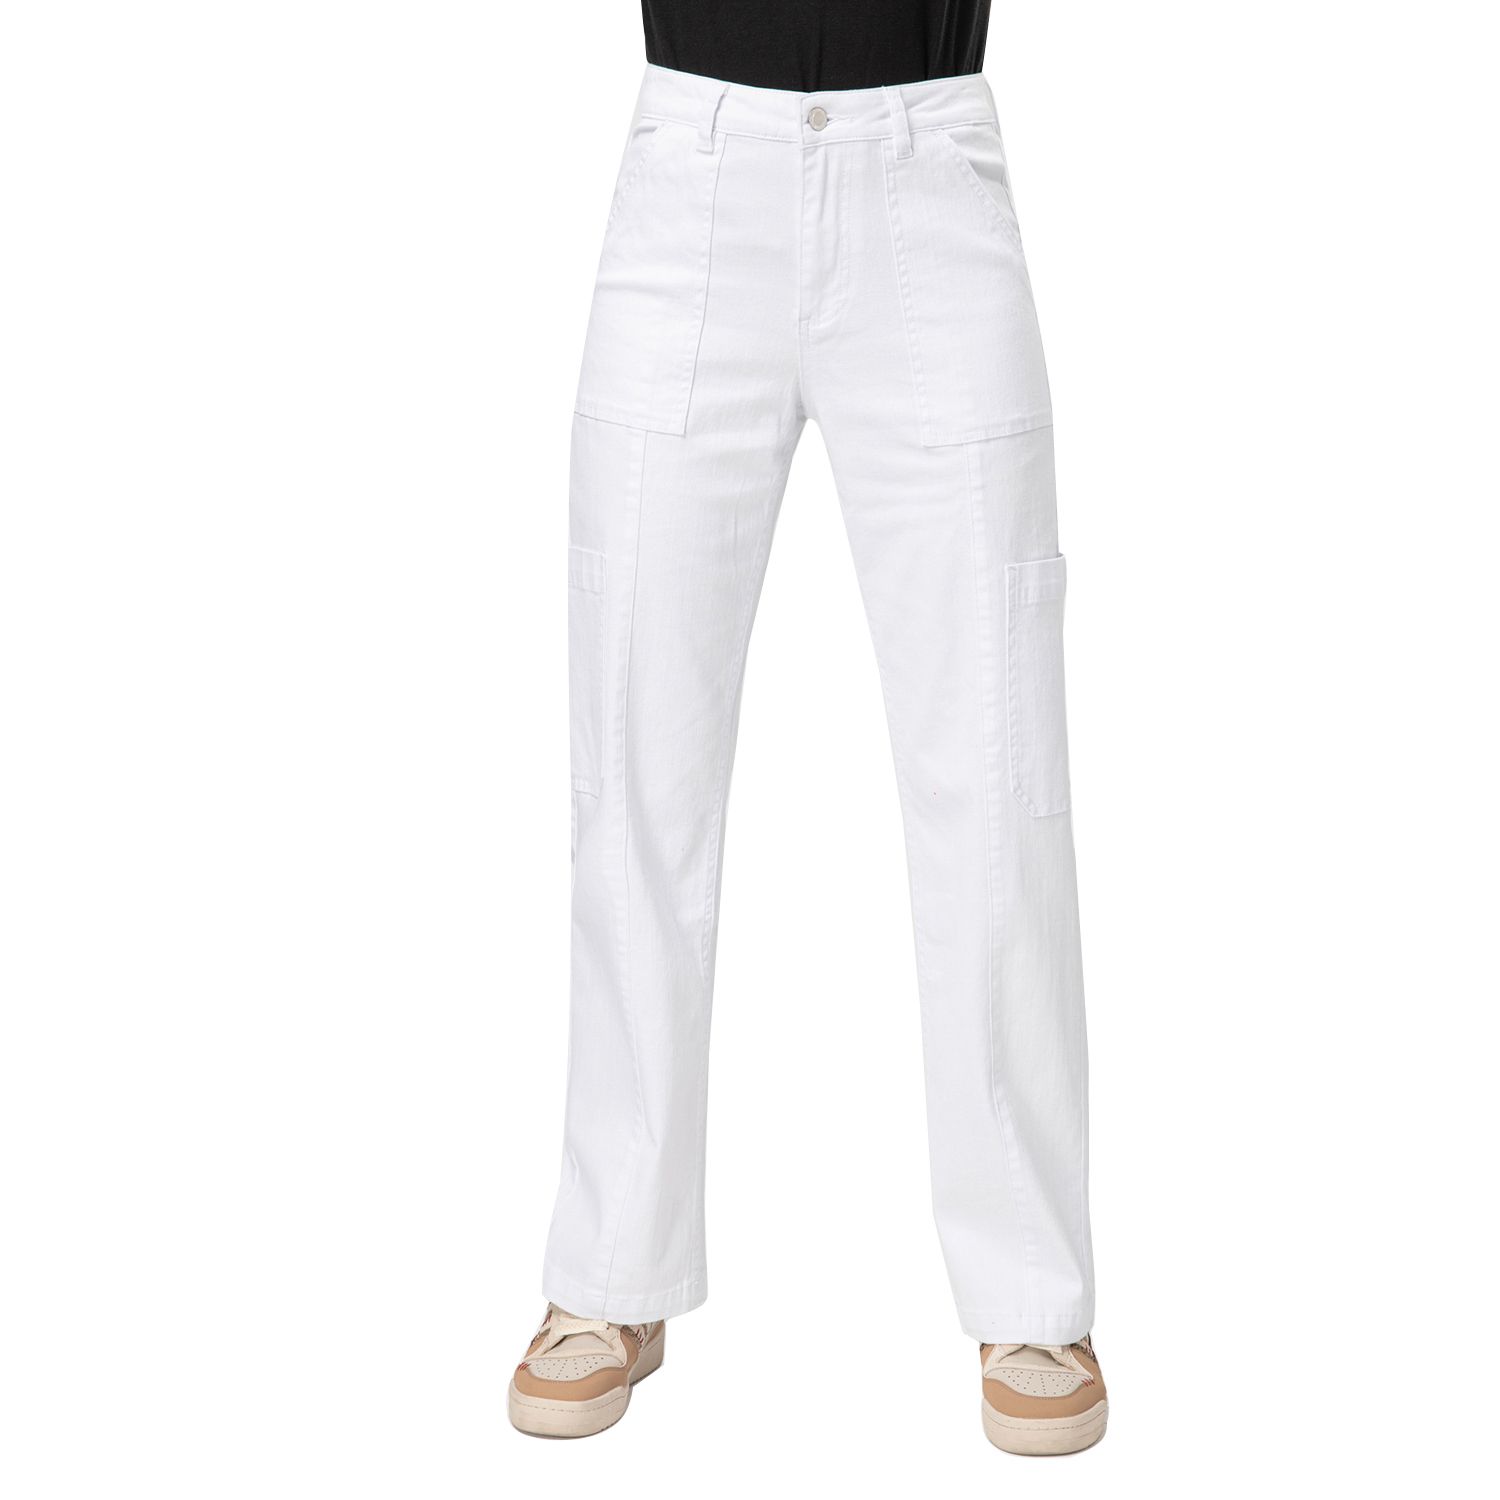 Jeans Recto Cargo Blanco Mujer Fashion'S Park